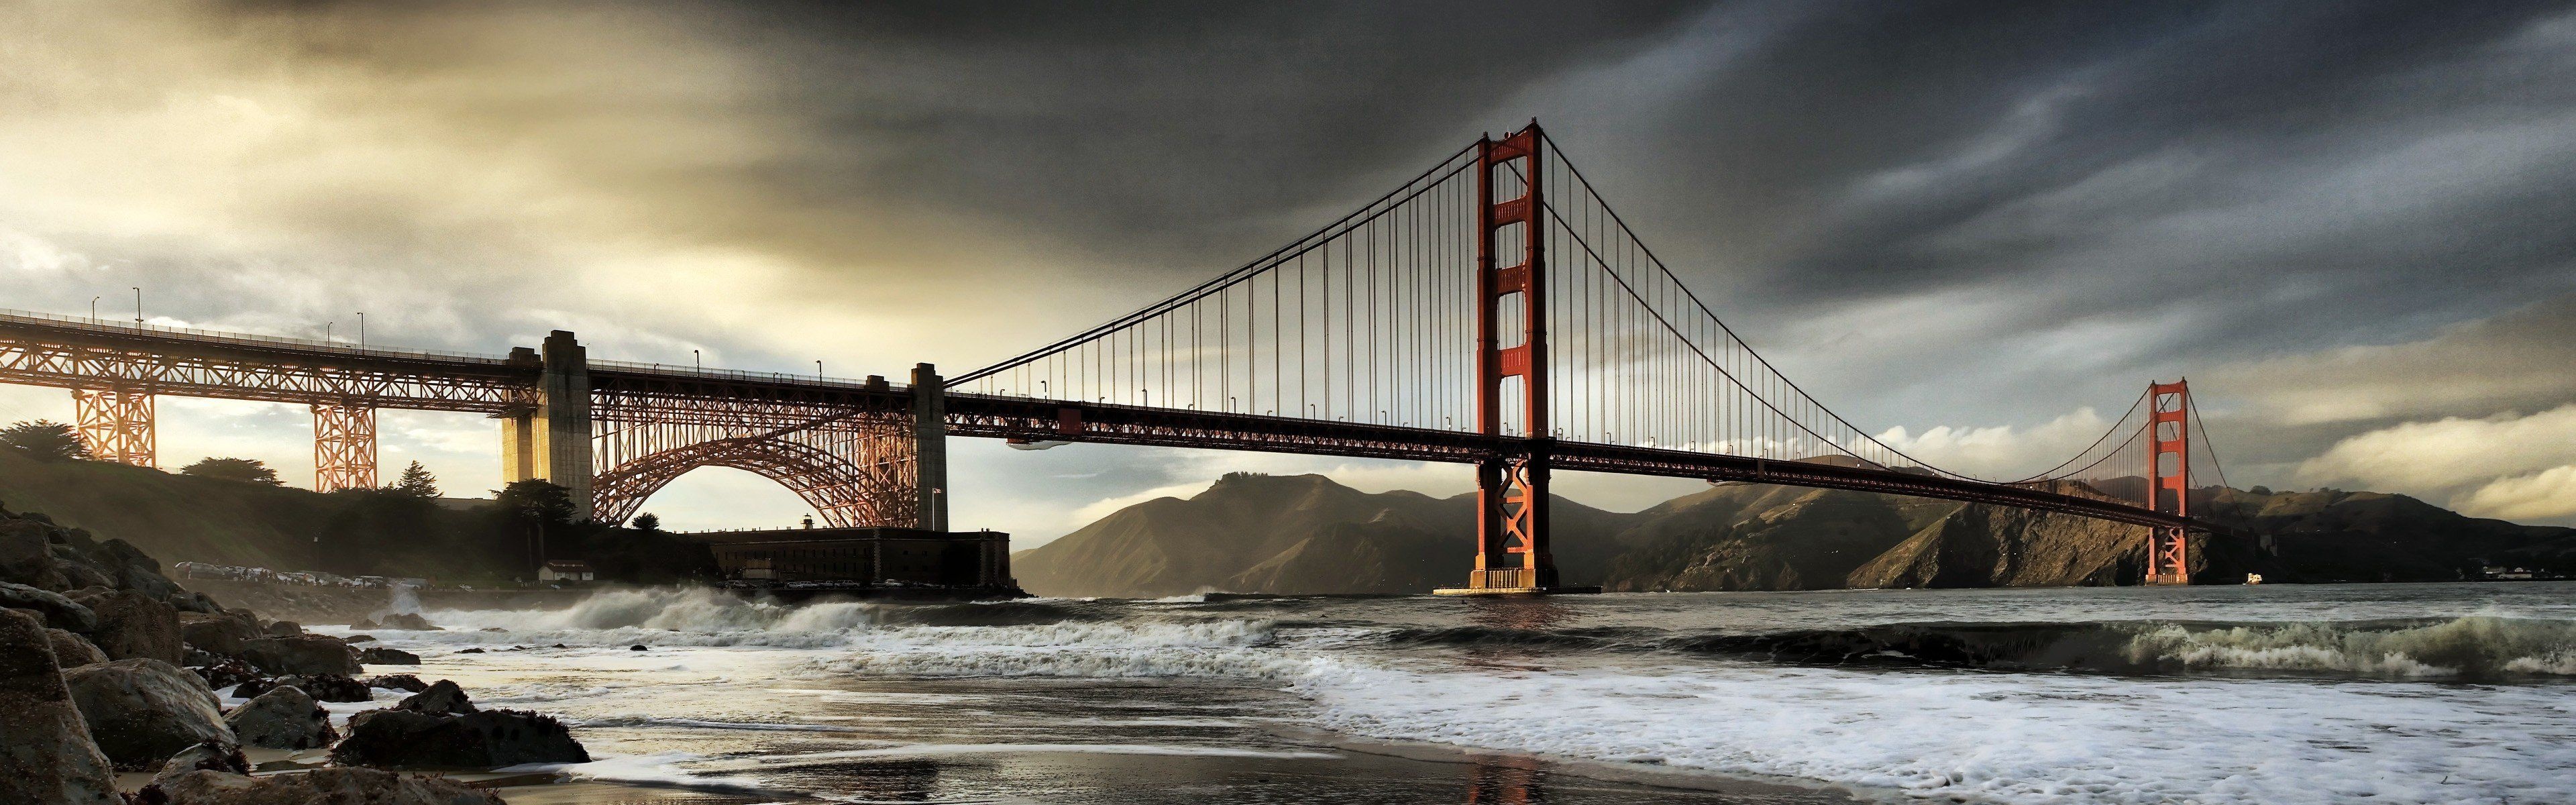 Bridge: The Golden Gate, One of the most internationally recognized symbols of San Francisco and California. 3840x1200 Dual Screen Wallpaper.